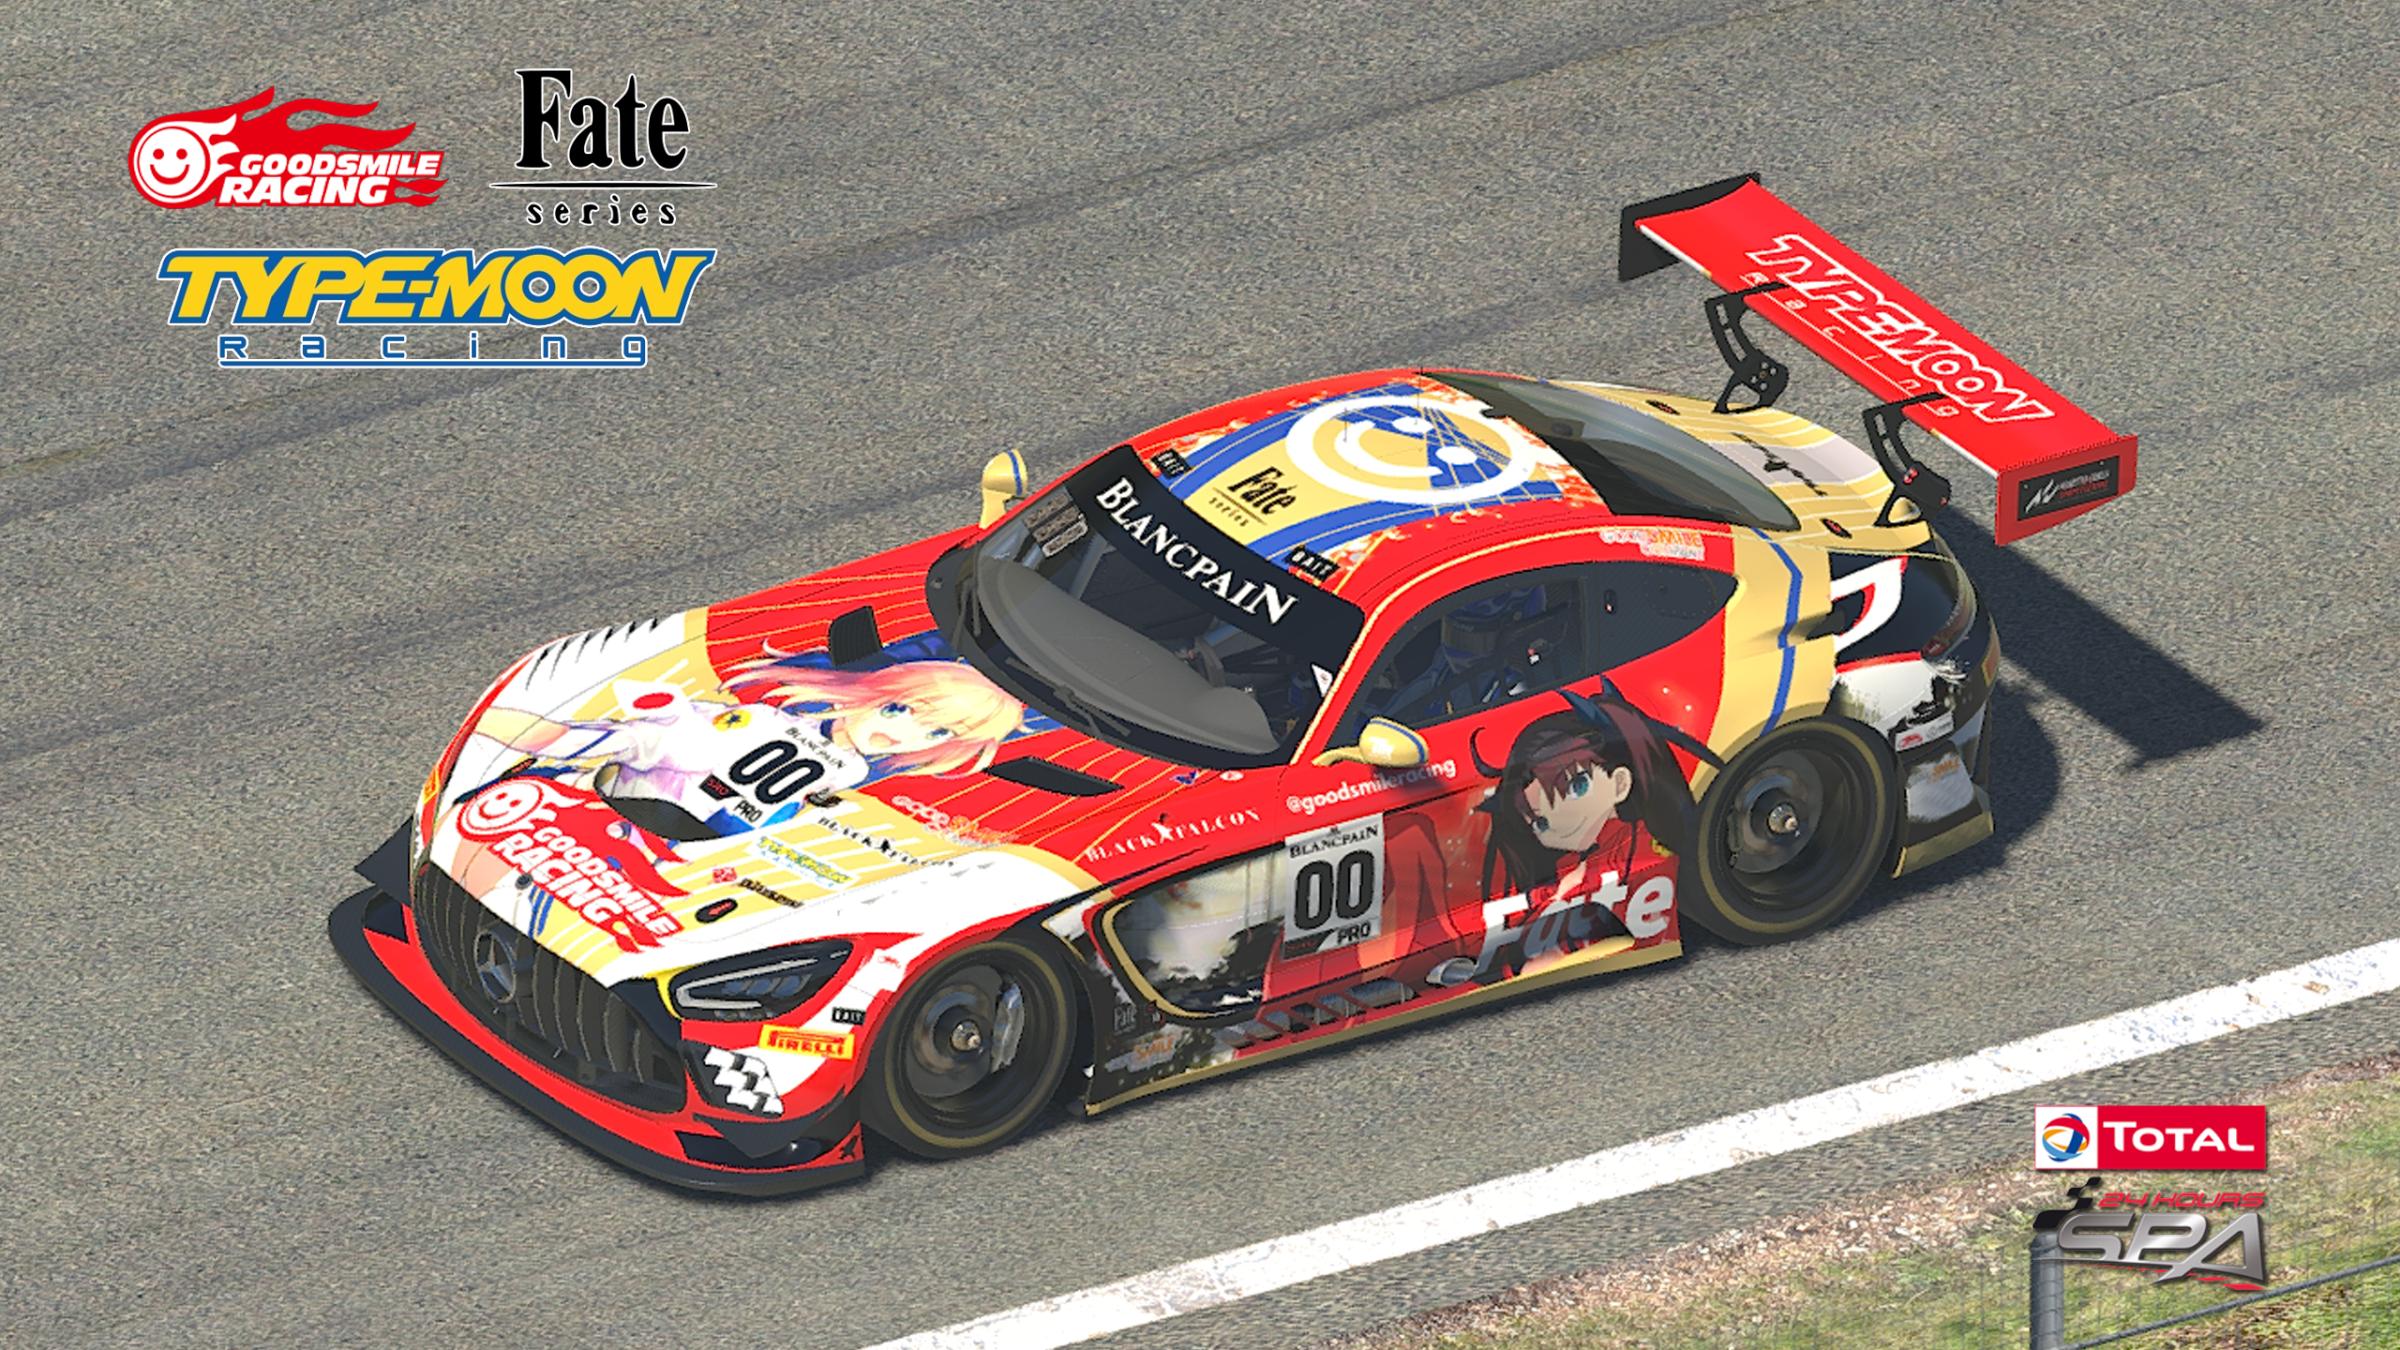 Preview of #00 Type Moon Racing - Fate - Test Day (2019 Spa 24 Hours) by Shinya Sakuta